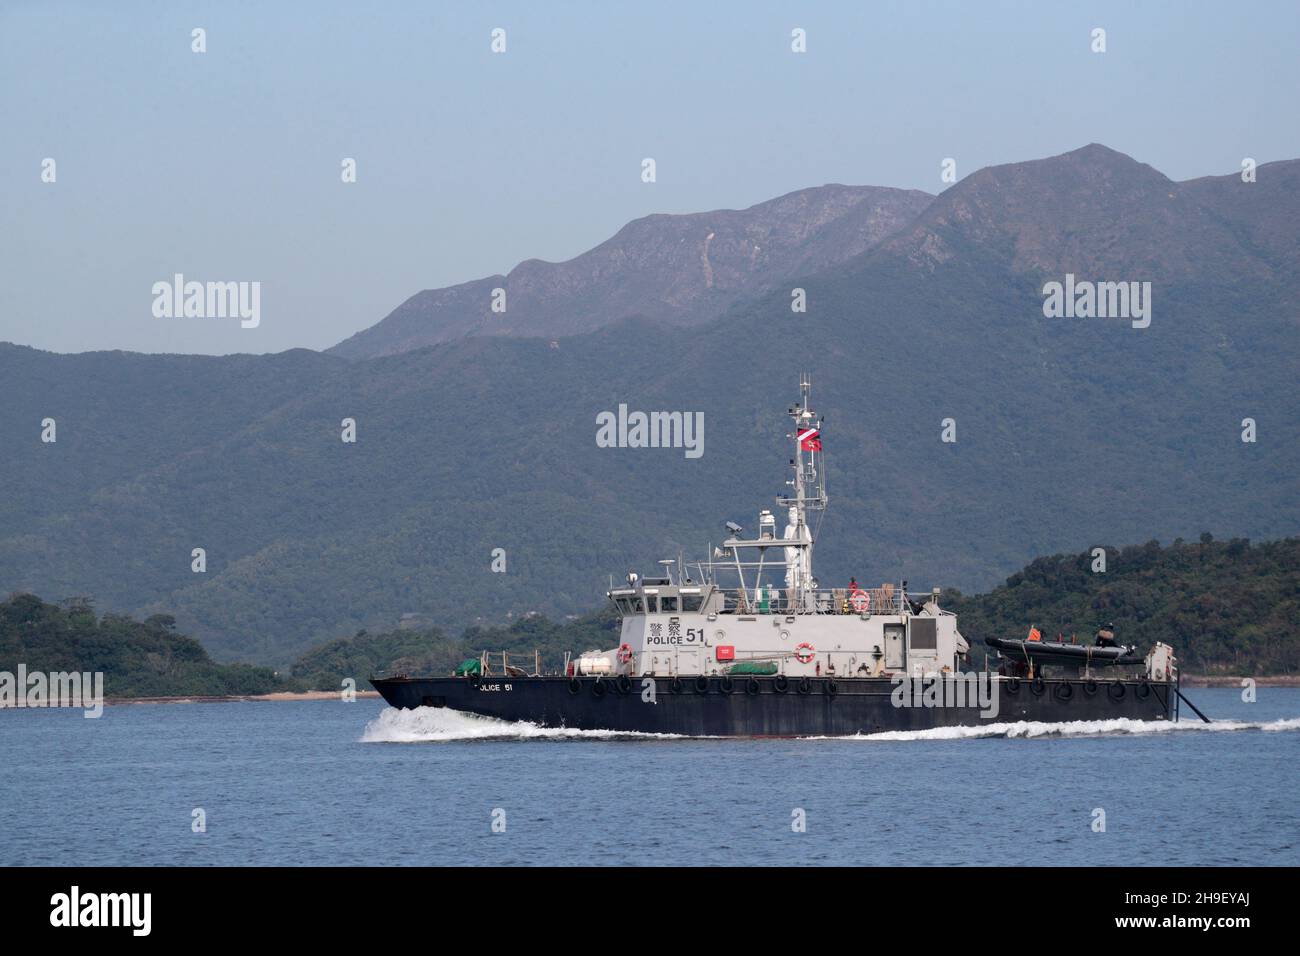 Police Launch 51, side view in Tolo Harbour with Pat Sin Hills in background, New Territories, Hong Kong 27th Nov 2021 Stock Photo